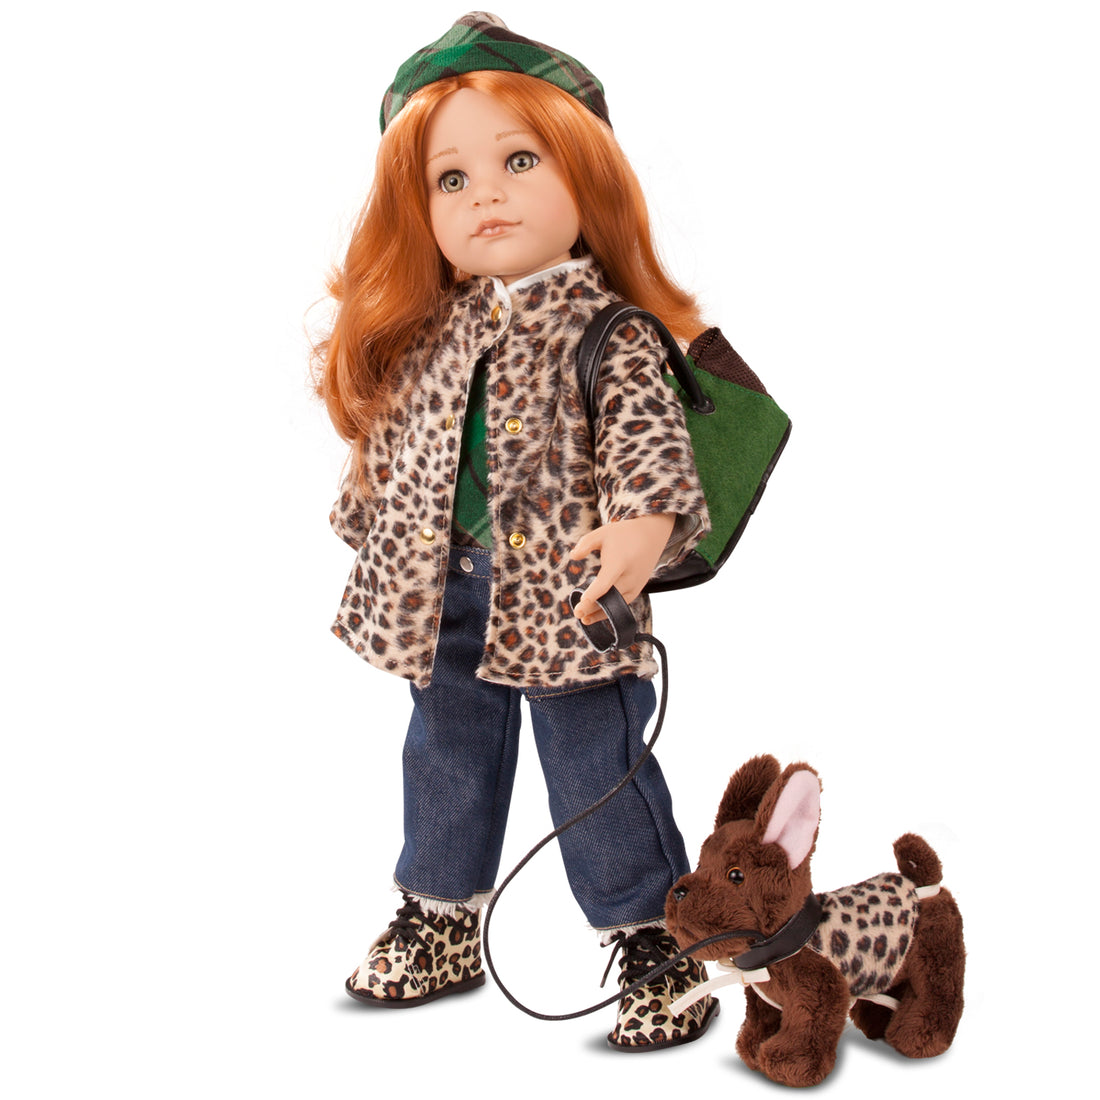 Hannah and her dog (In Leopard print) - Dolls and Accessories